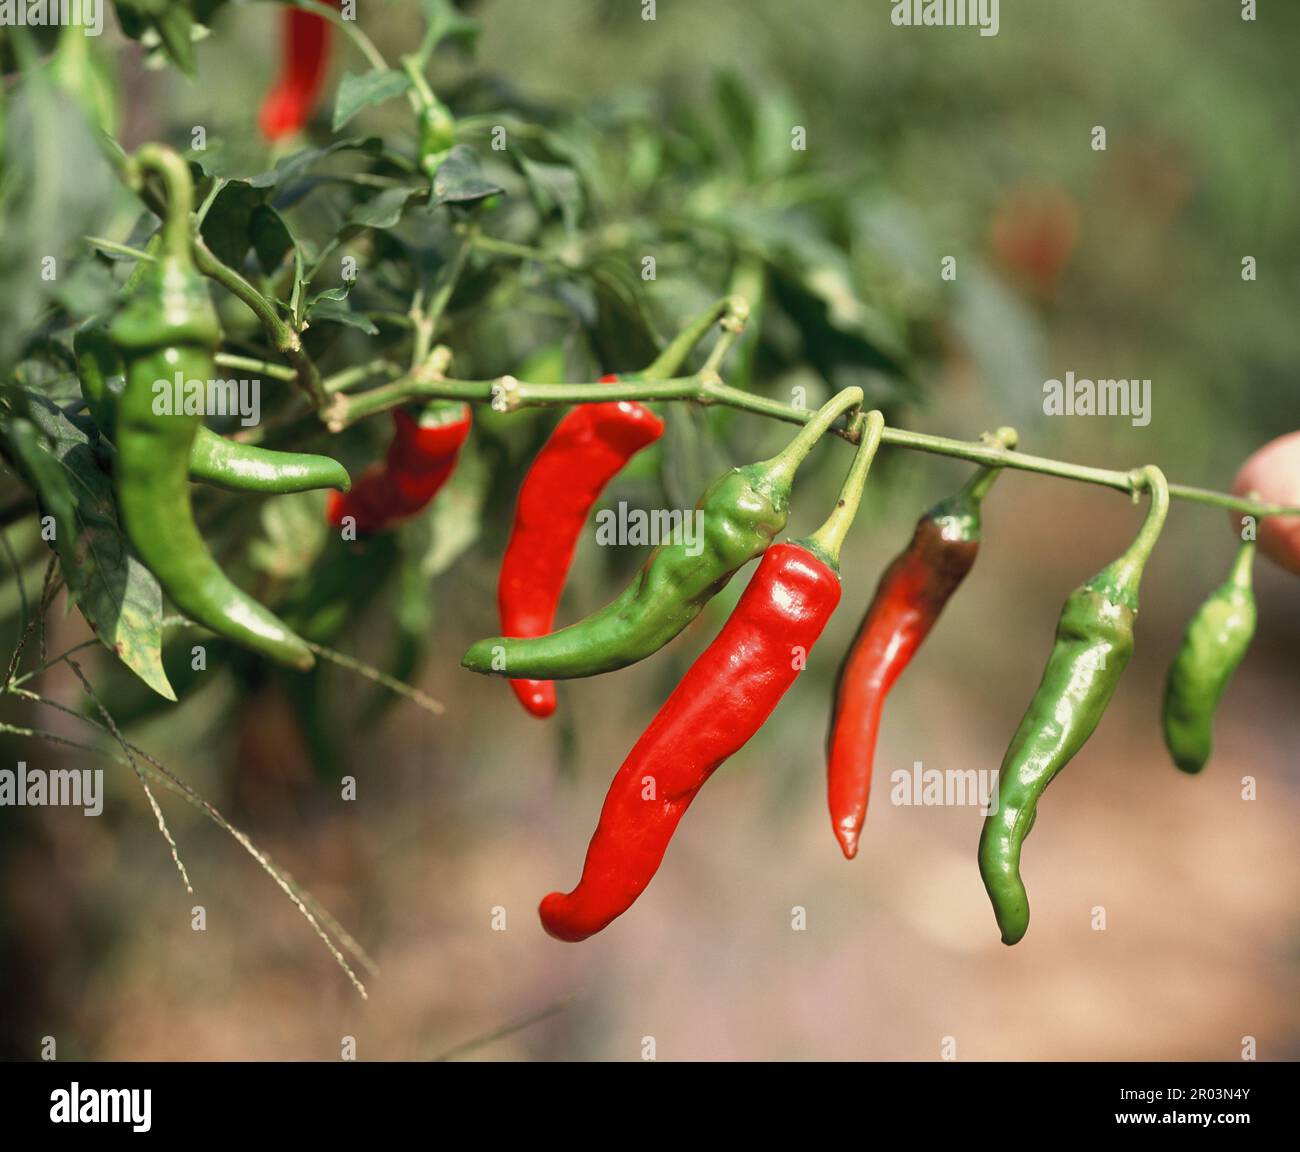 South Korea. Plants. Agriculture. Growing chili peppers. Stock Photo